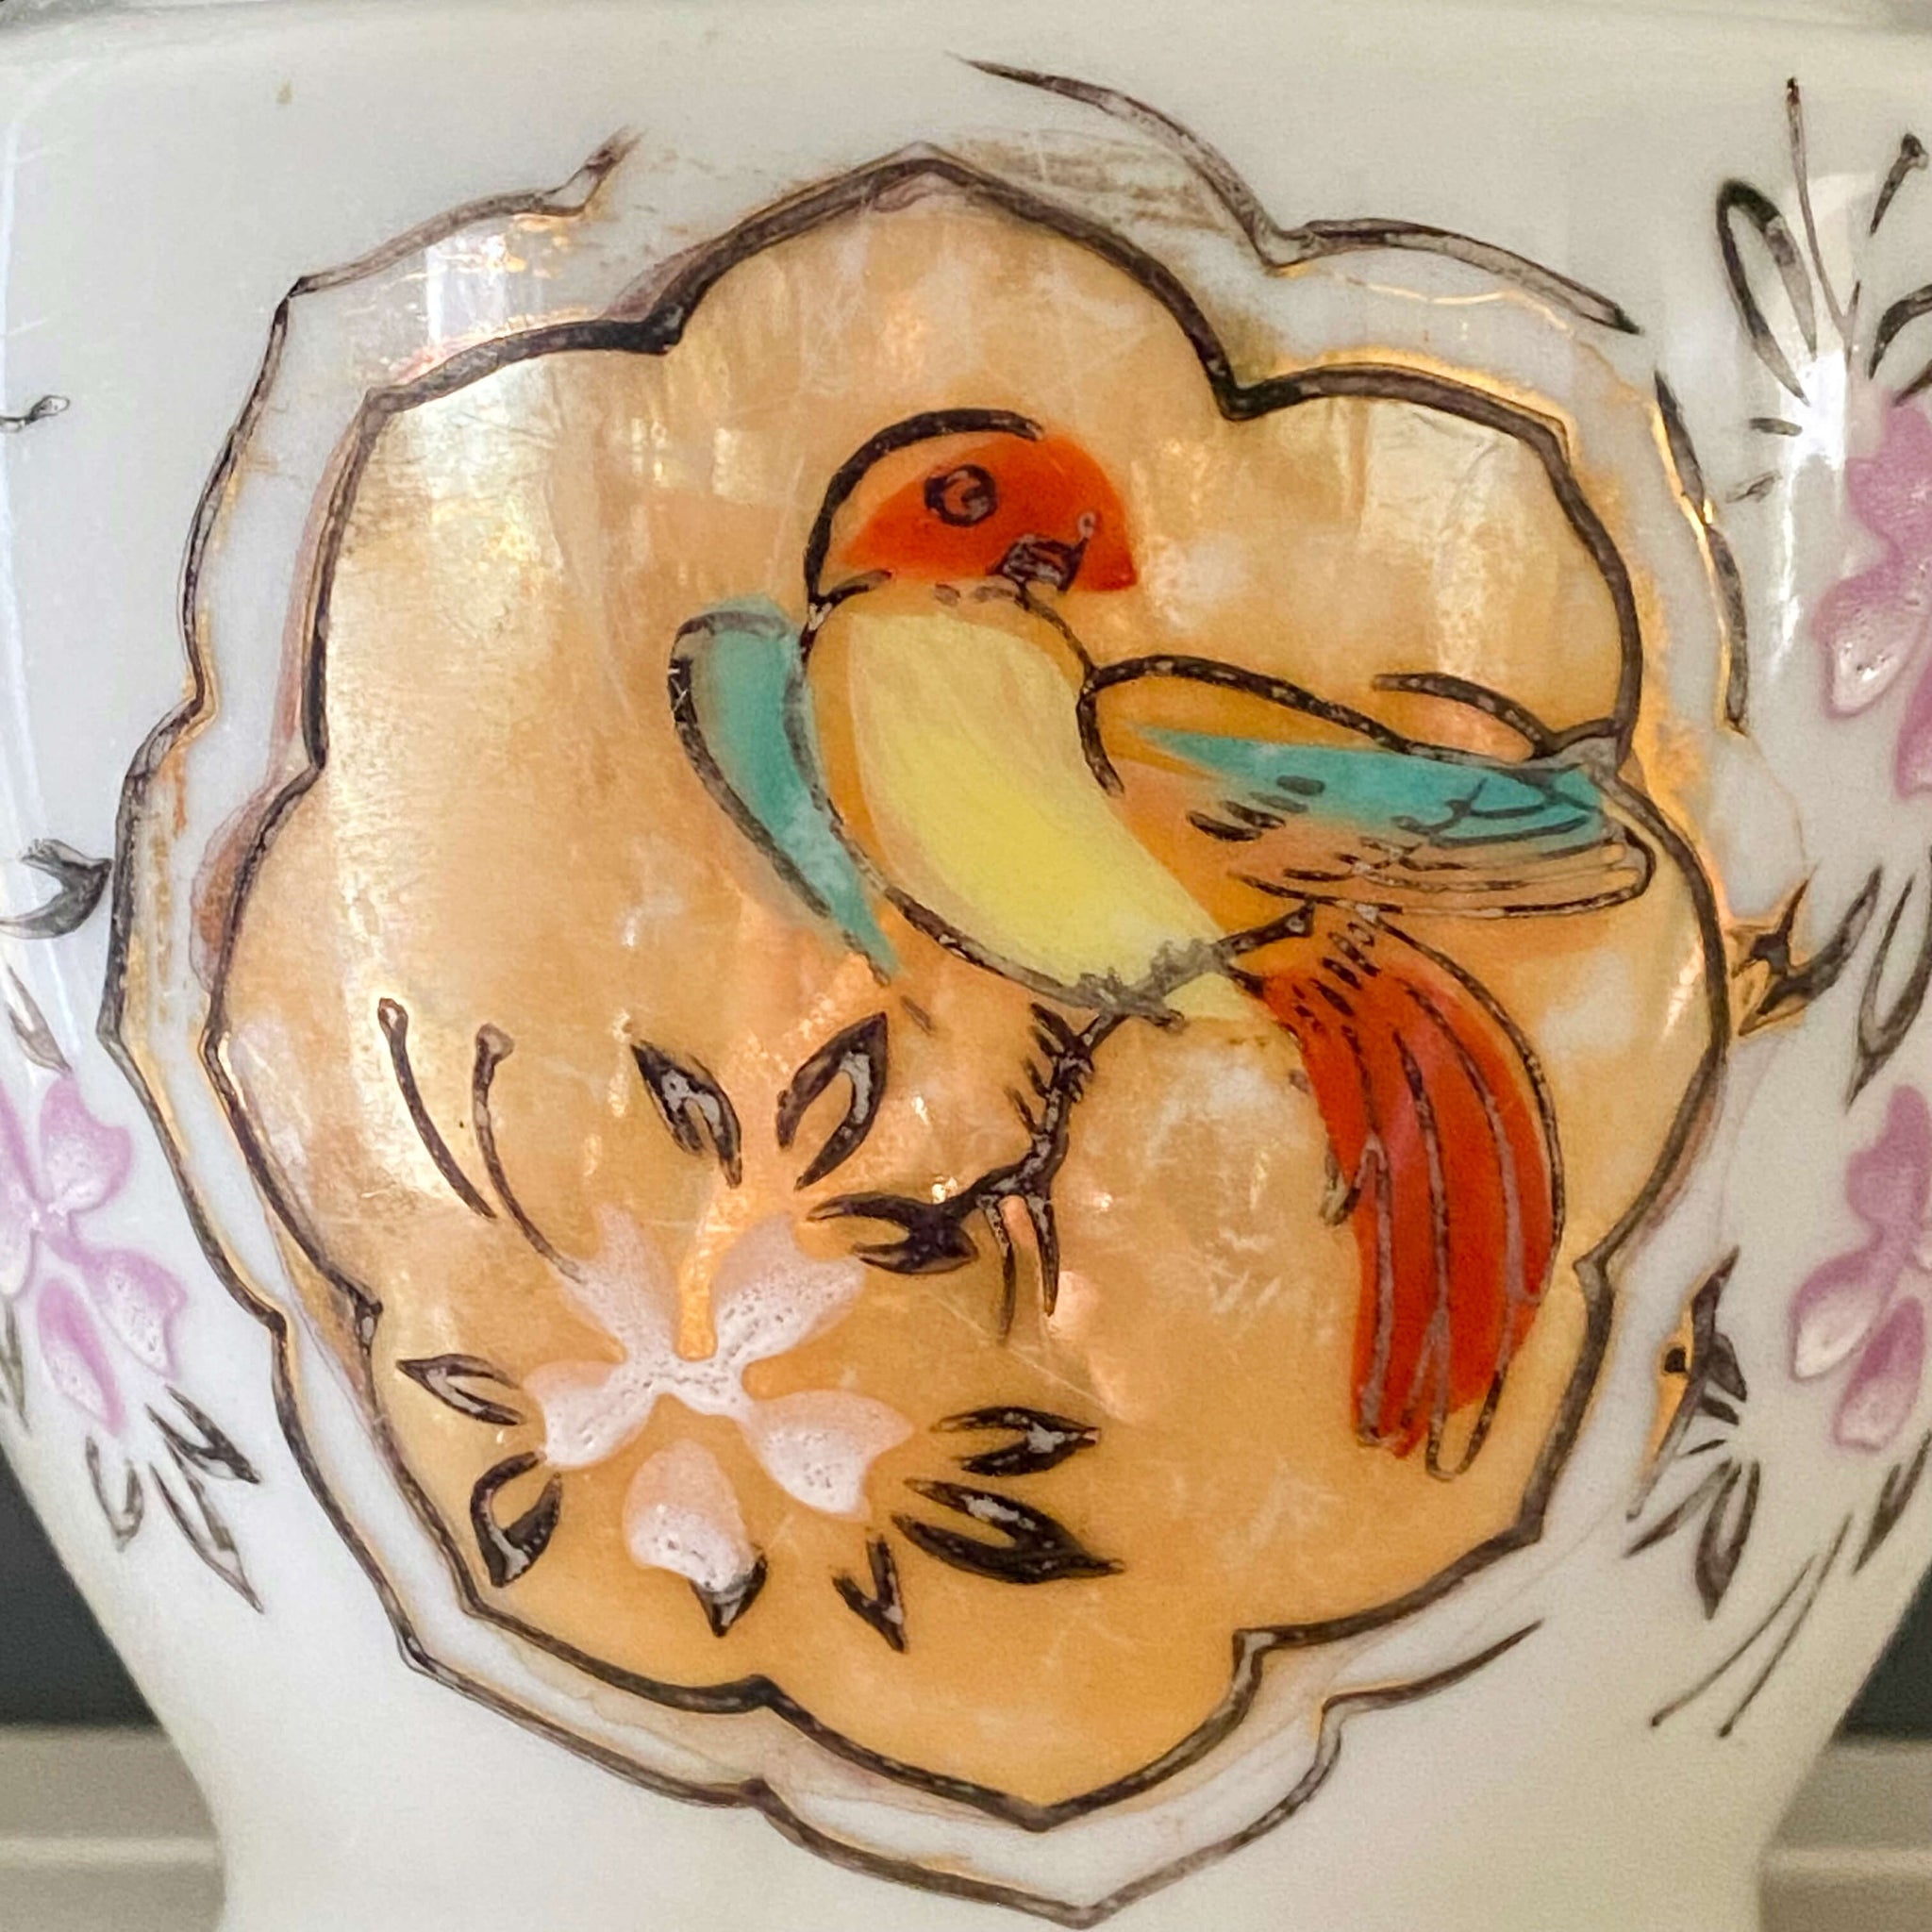 Vintage Porcelain Lustreware Sugar Bowl with Handpainted Bird Made in Japan circa 1940s/1950s